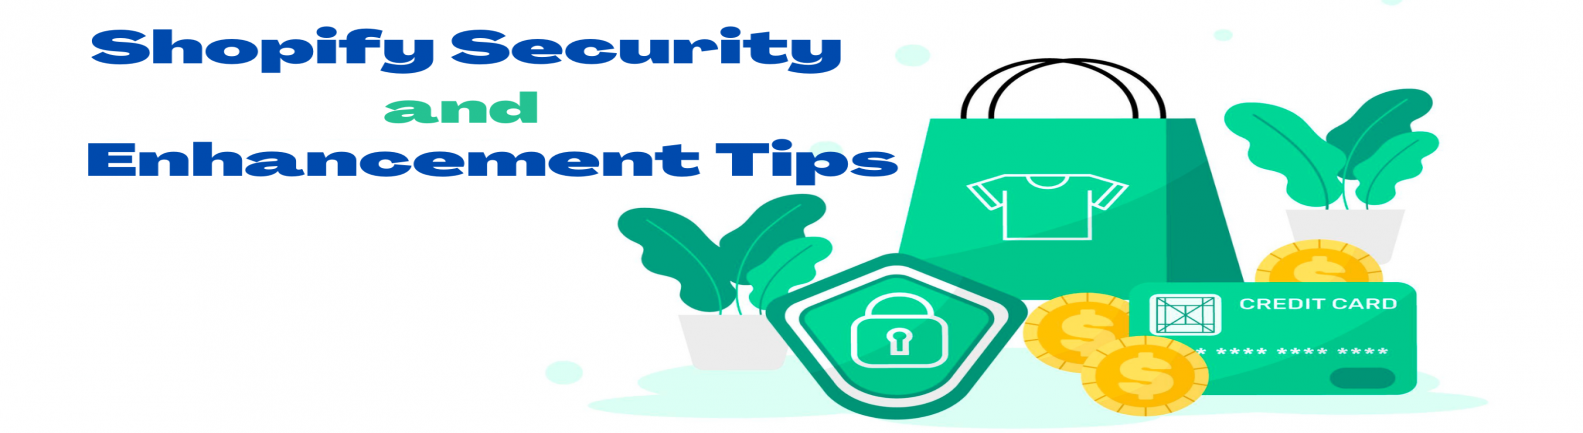 shopify-security-and-enhancement-tips-resize